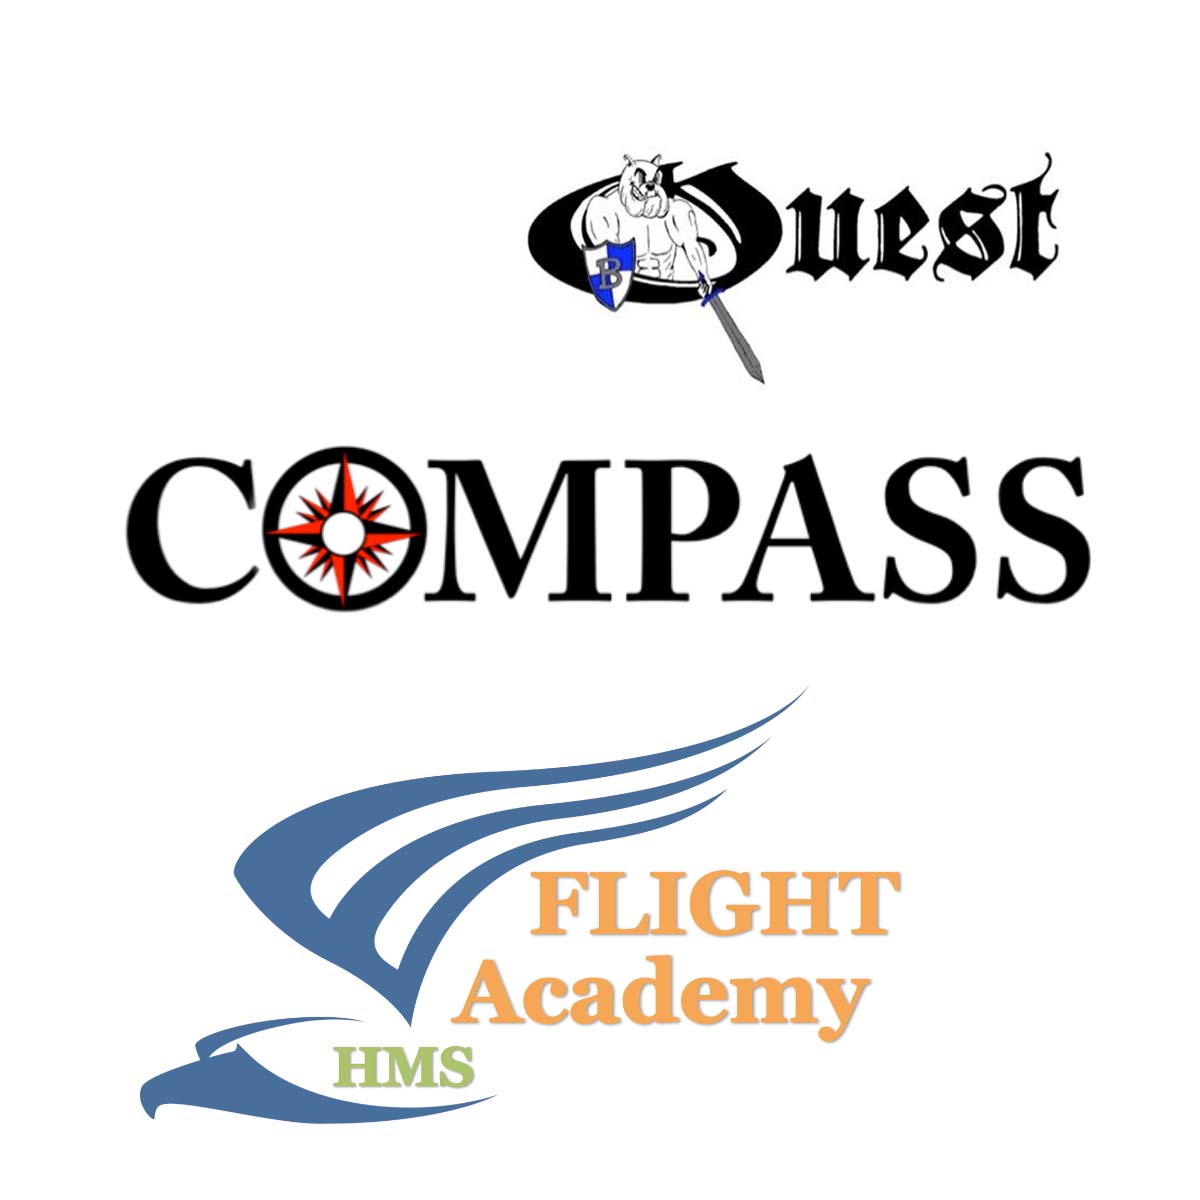 Logos for the Quest, Compass, and FLIGHT programs